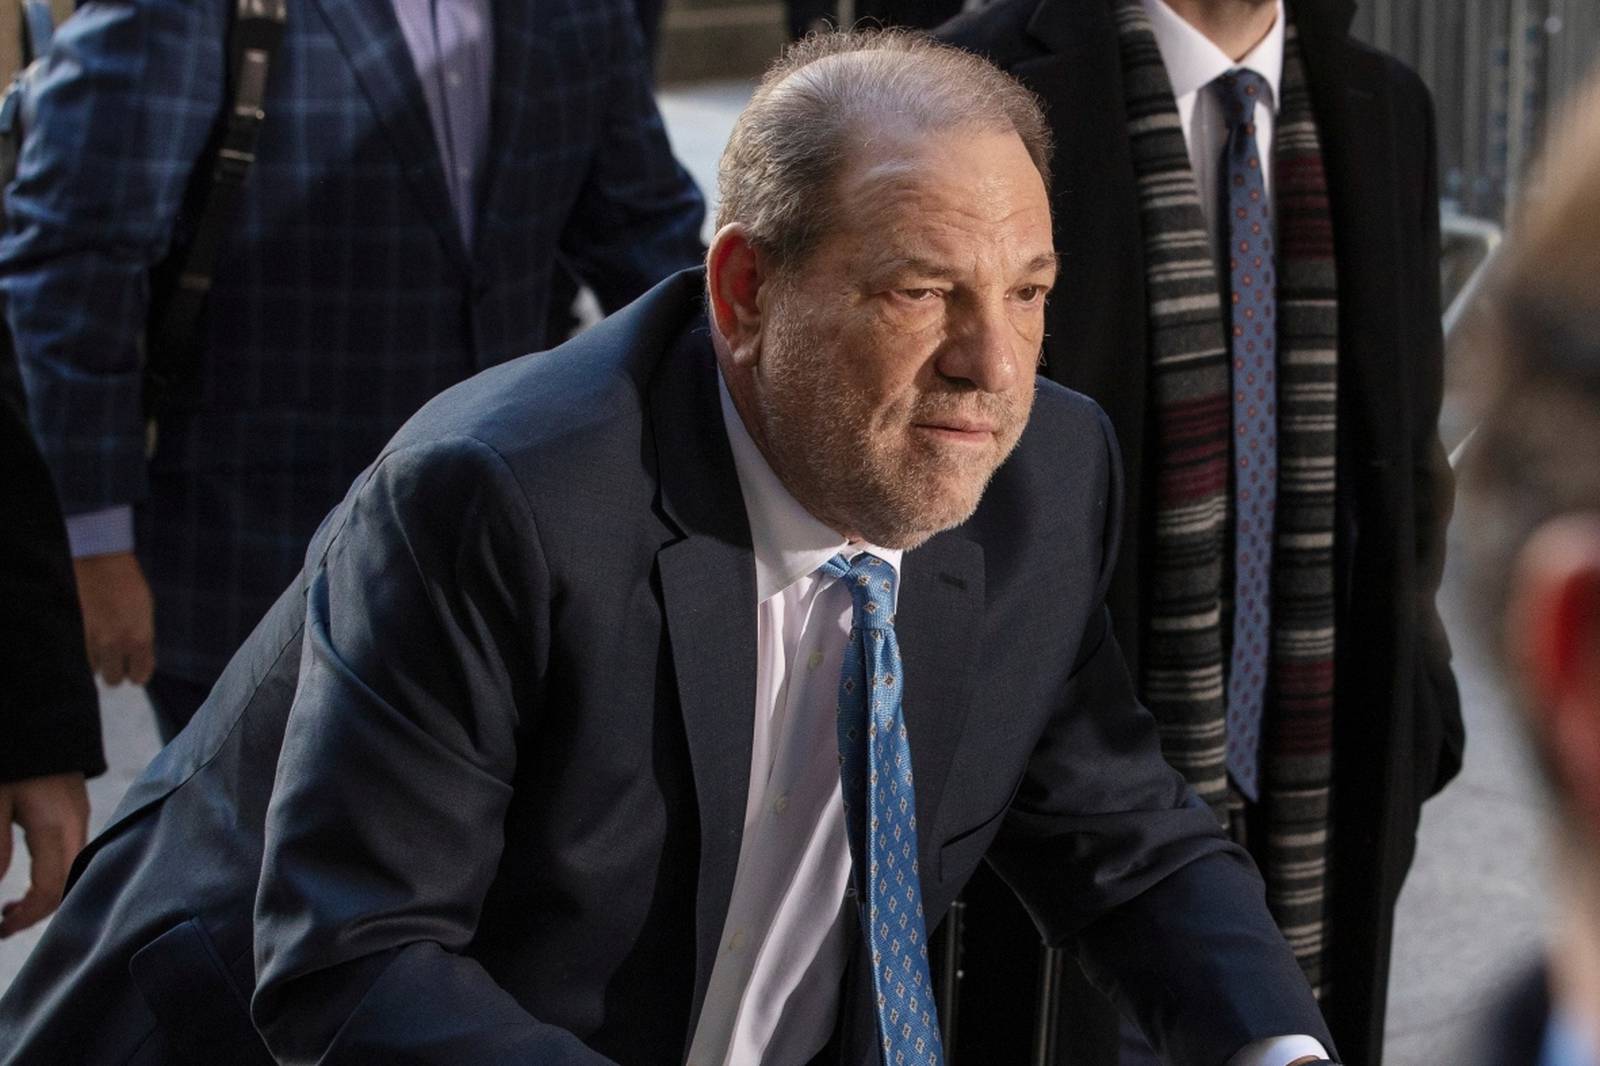 FILE PHOTO: Harvey Weinstein arrives at New York Criminal Court for another day of jury deliberations in his sexual assault trial in the Manhattan borough of New York City